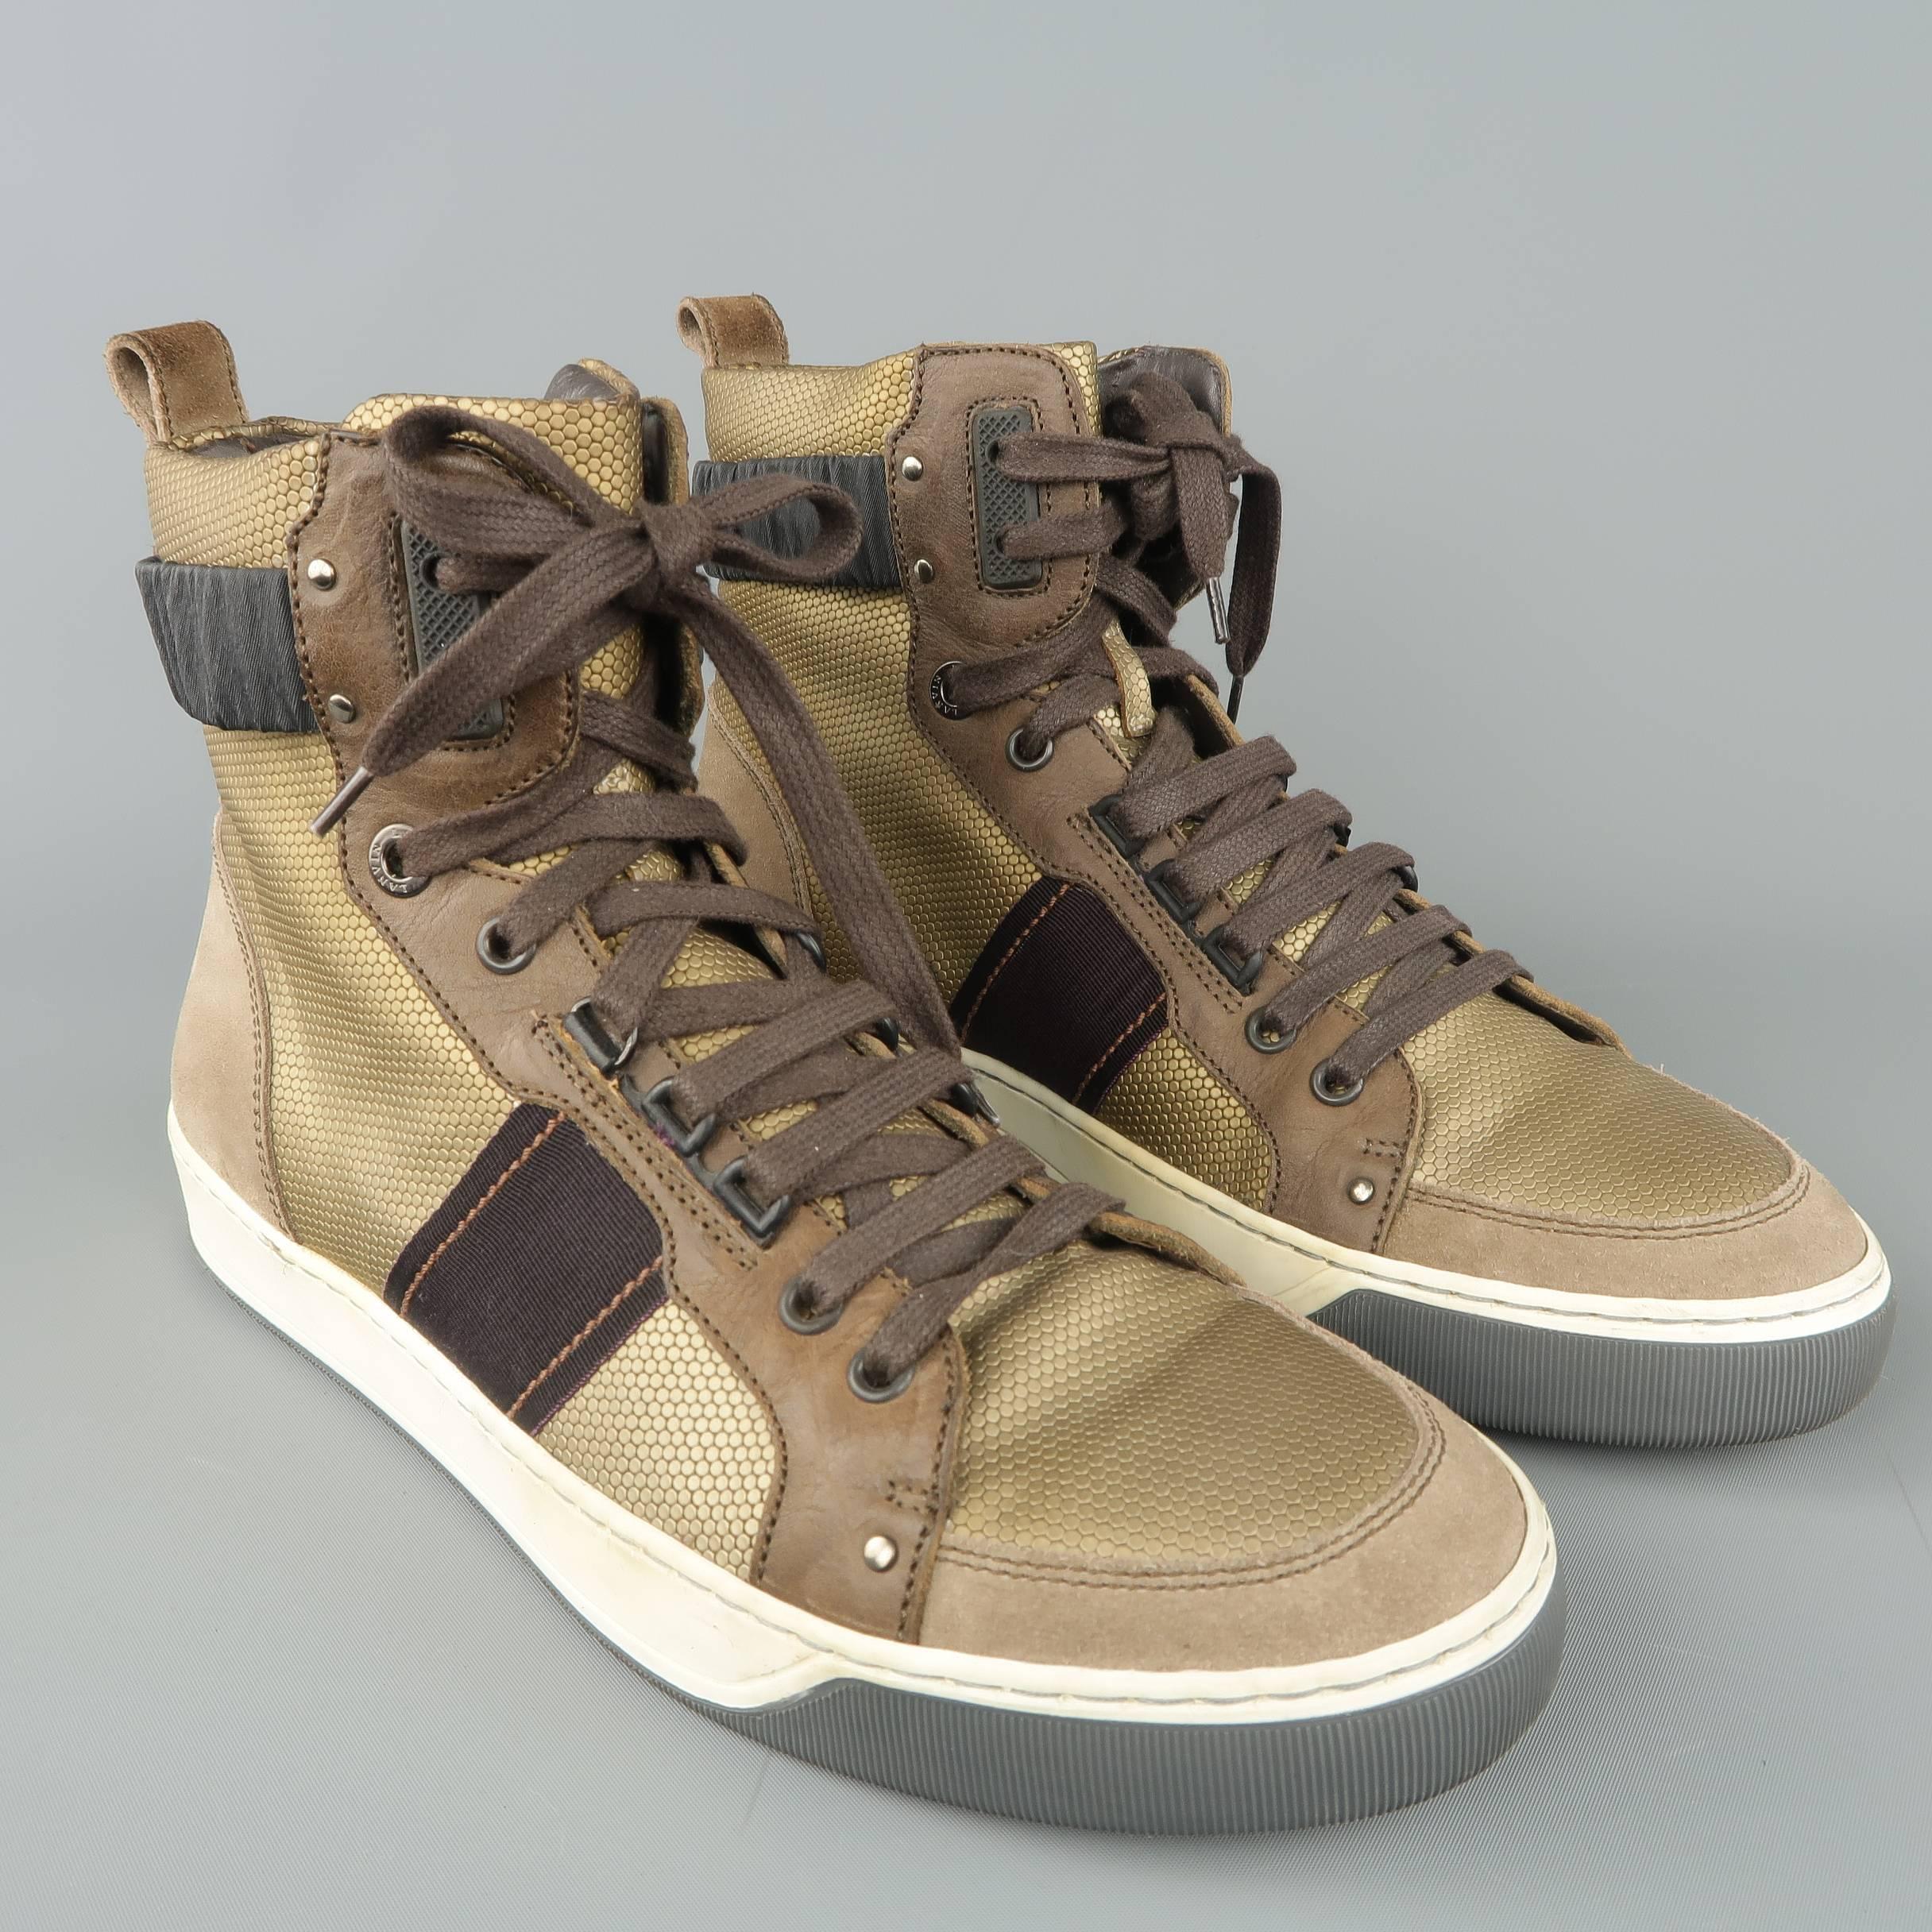 Brown Men's LANVIN Size 8 Metallic Gold & Taupe Suede High Top Cuff Sneakers